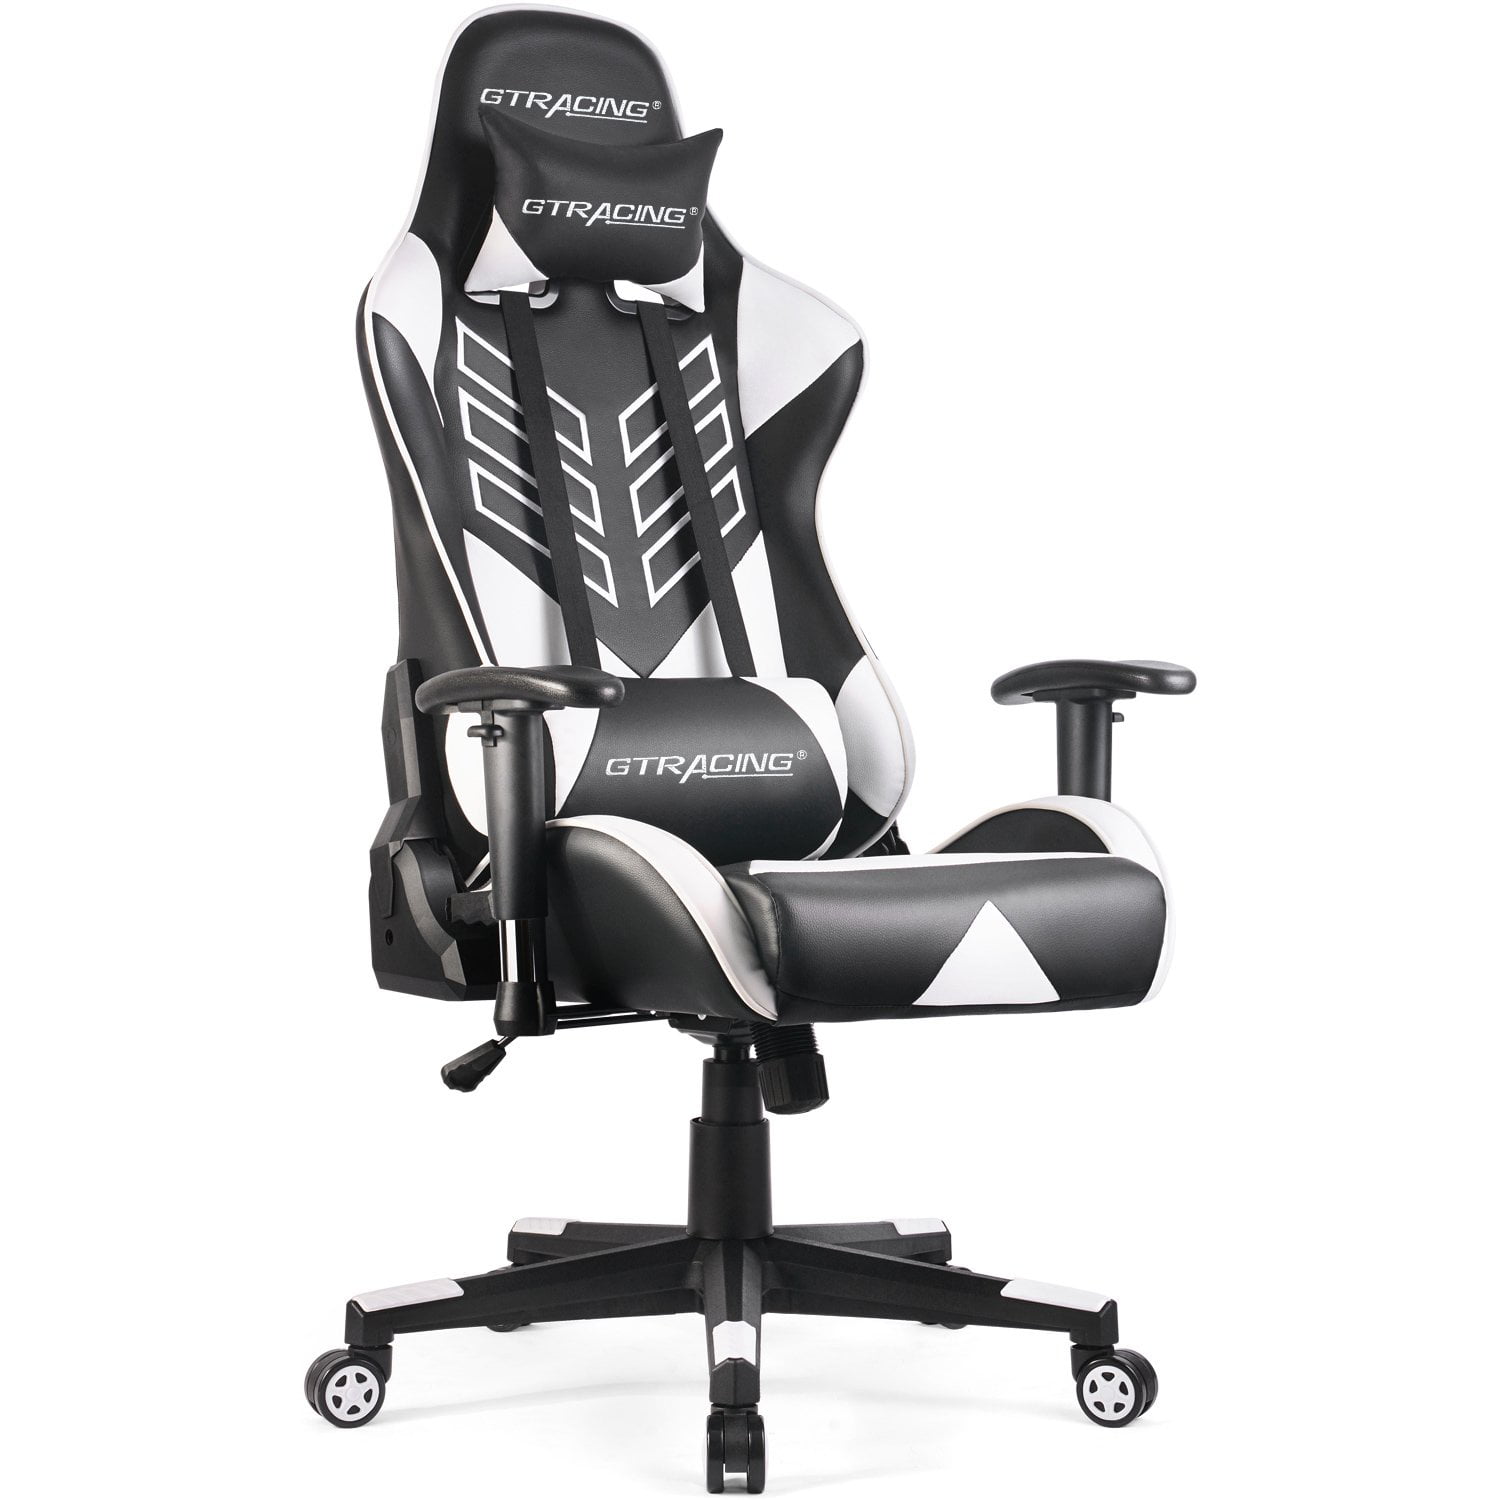 GTPLAYER Gaming Chair in Home PU Leather Ergonomic Office